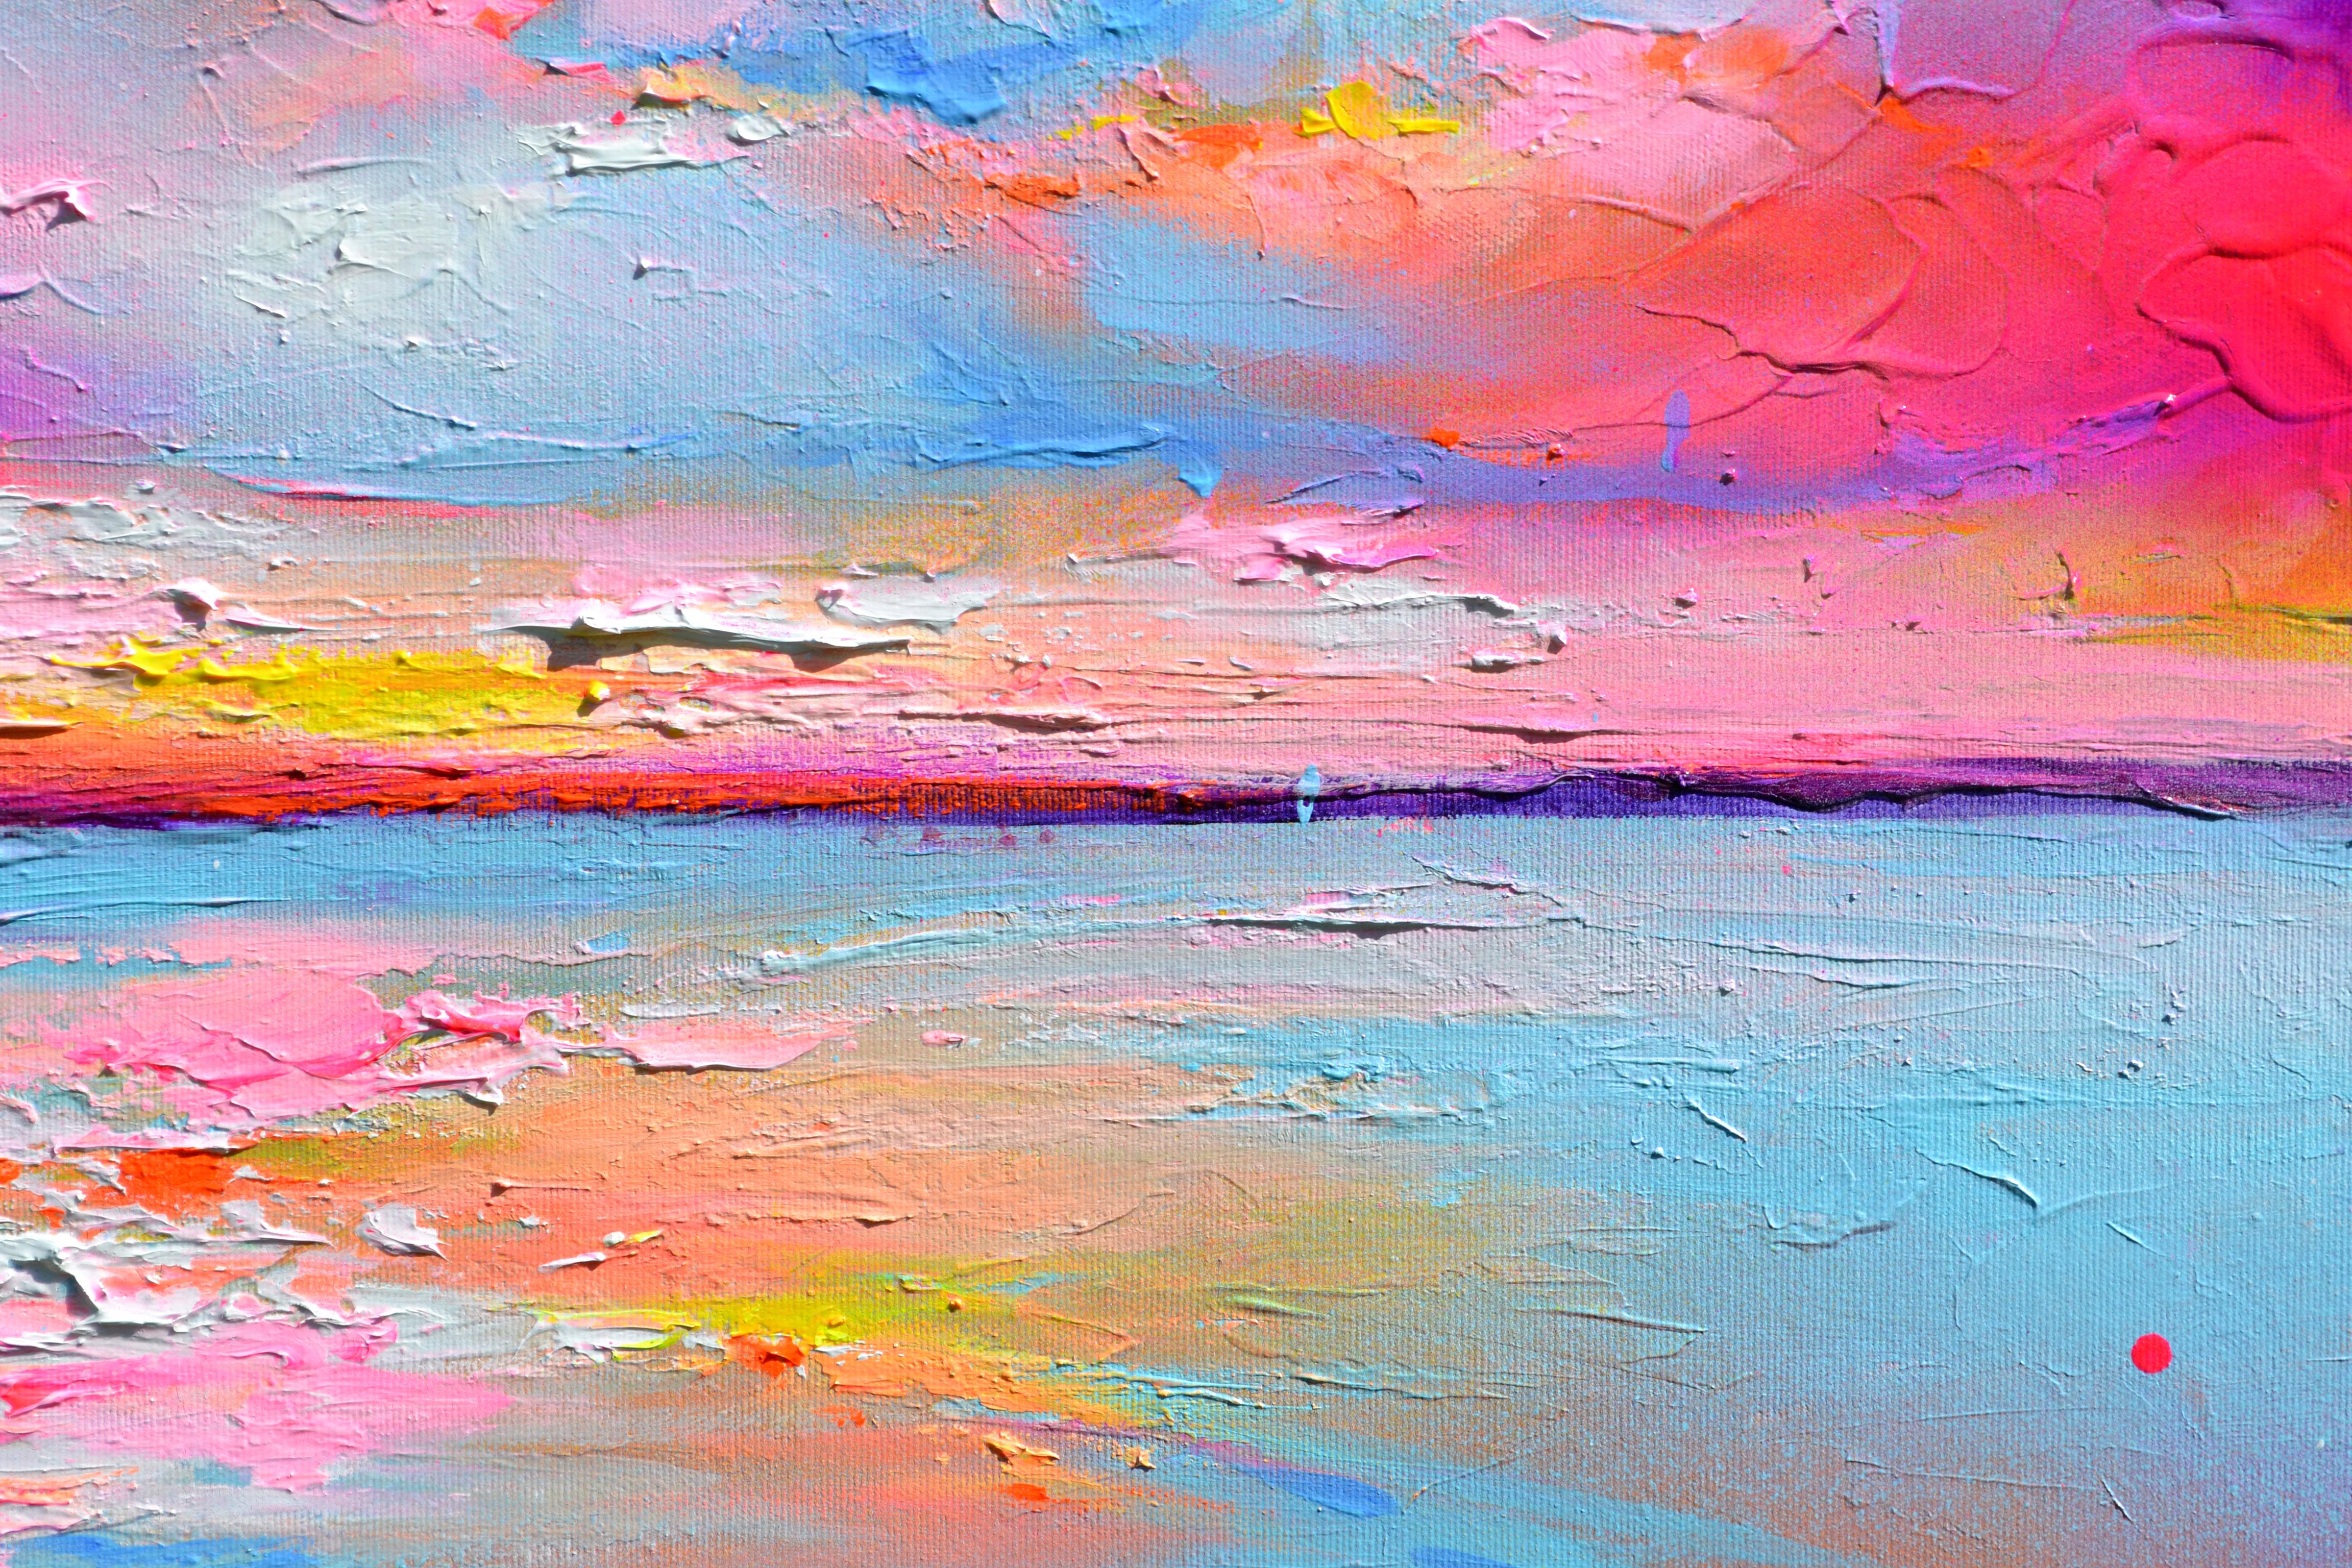 New Horizon 179 Colourful Sunset Seascape 50x70 cm - Impressionist Painting by Soos Roxana Gabriela